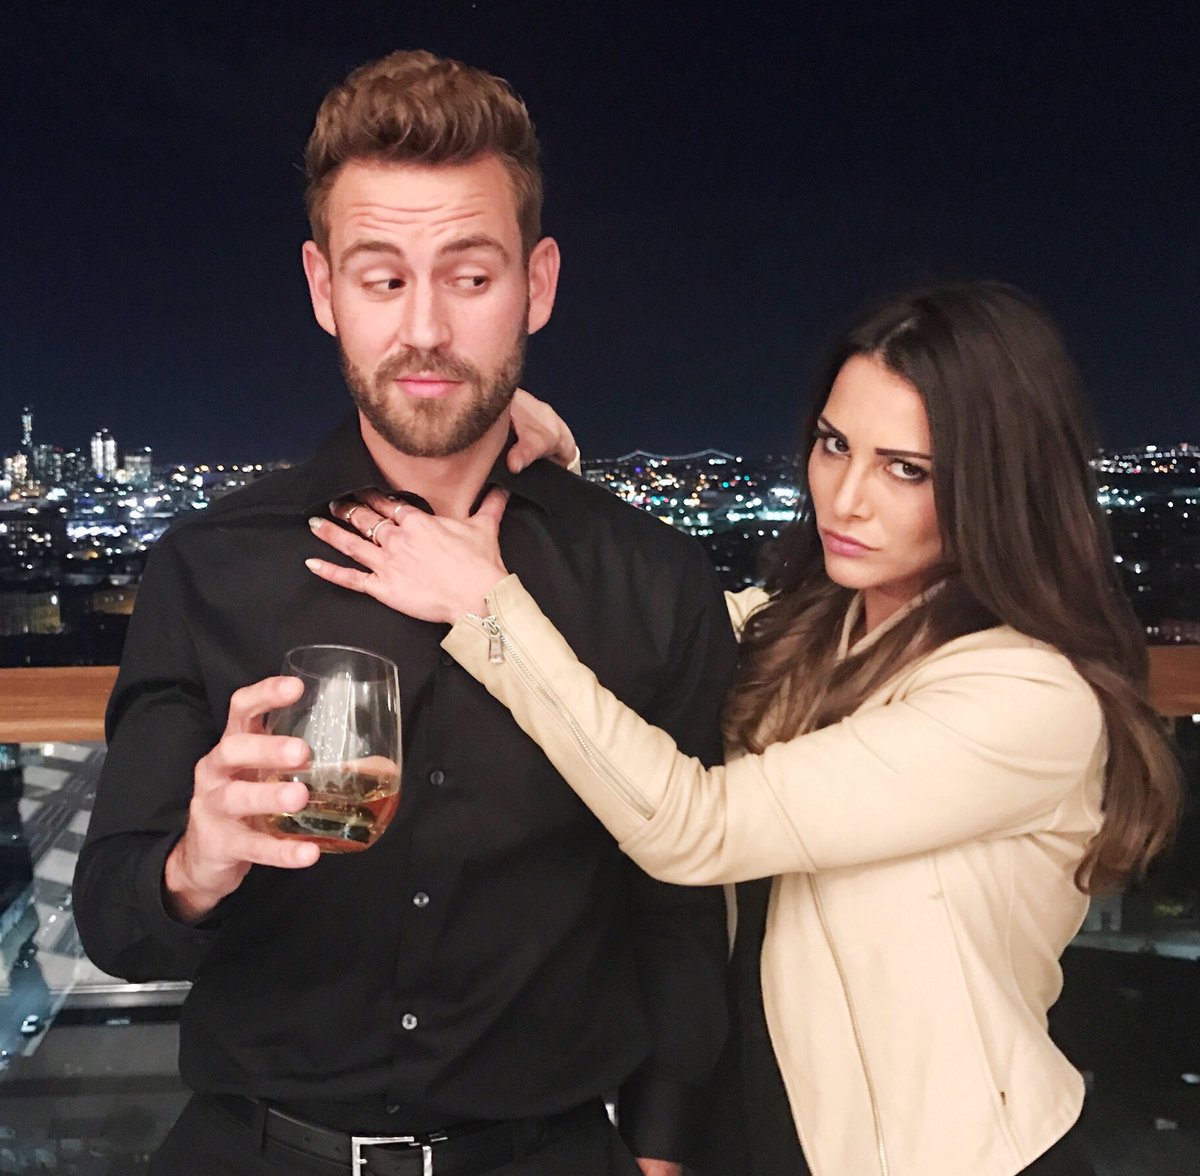  Nick Viall - Bachelor 21 - Episode 9 Feb 27 - *Sleuthing Spoilers* - Page 2 C5MkfomWcAA6Nrk